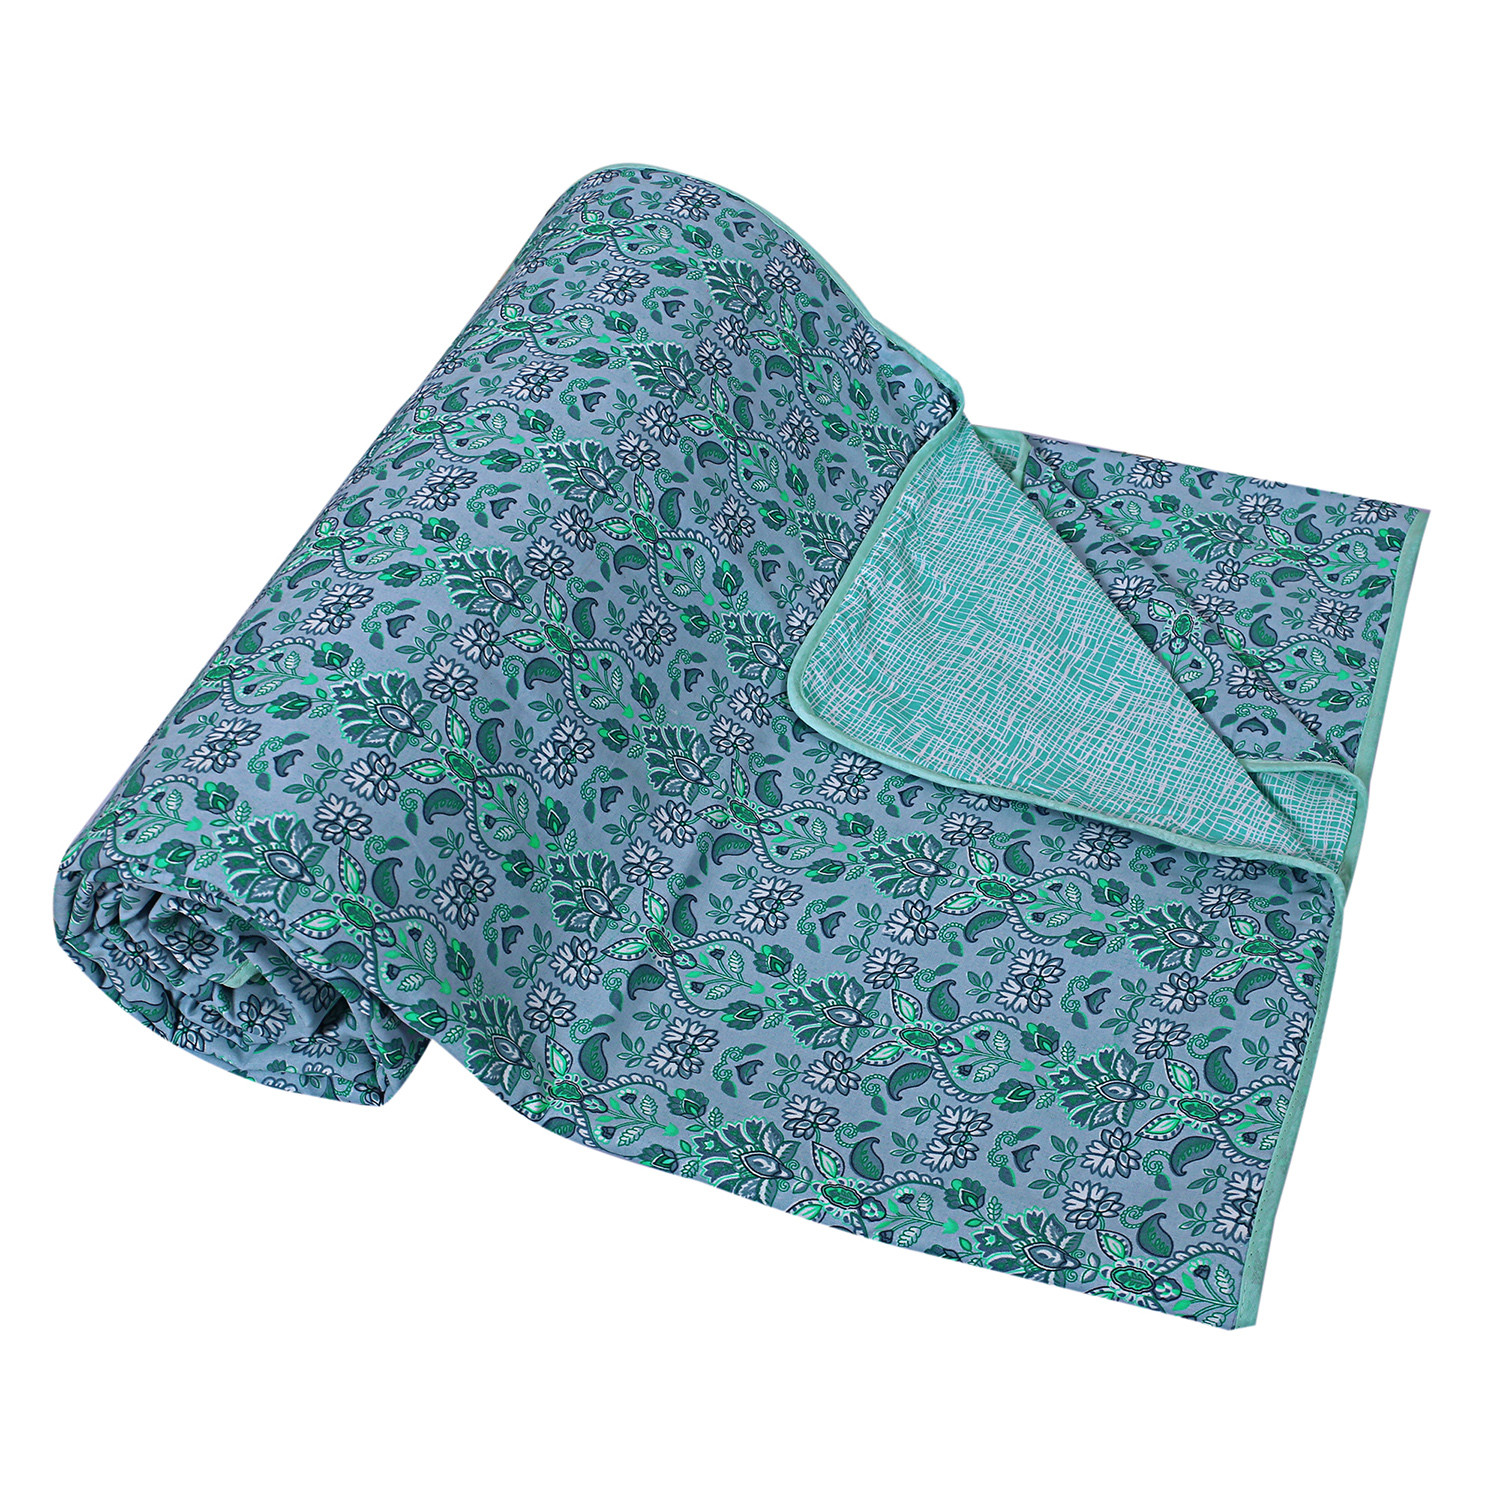 Kuber Industries Cotton Soft Lightweight Paisley Design Reversible Single Bed Dohar | Blanket | AC Quilt for Home & Travel (Green)